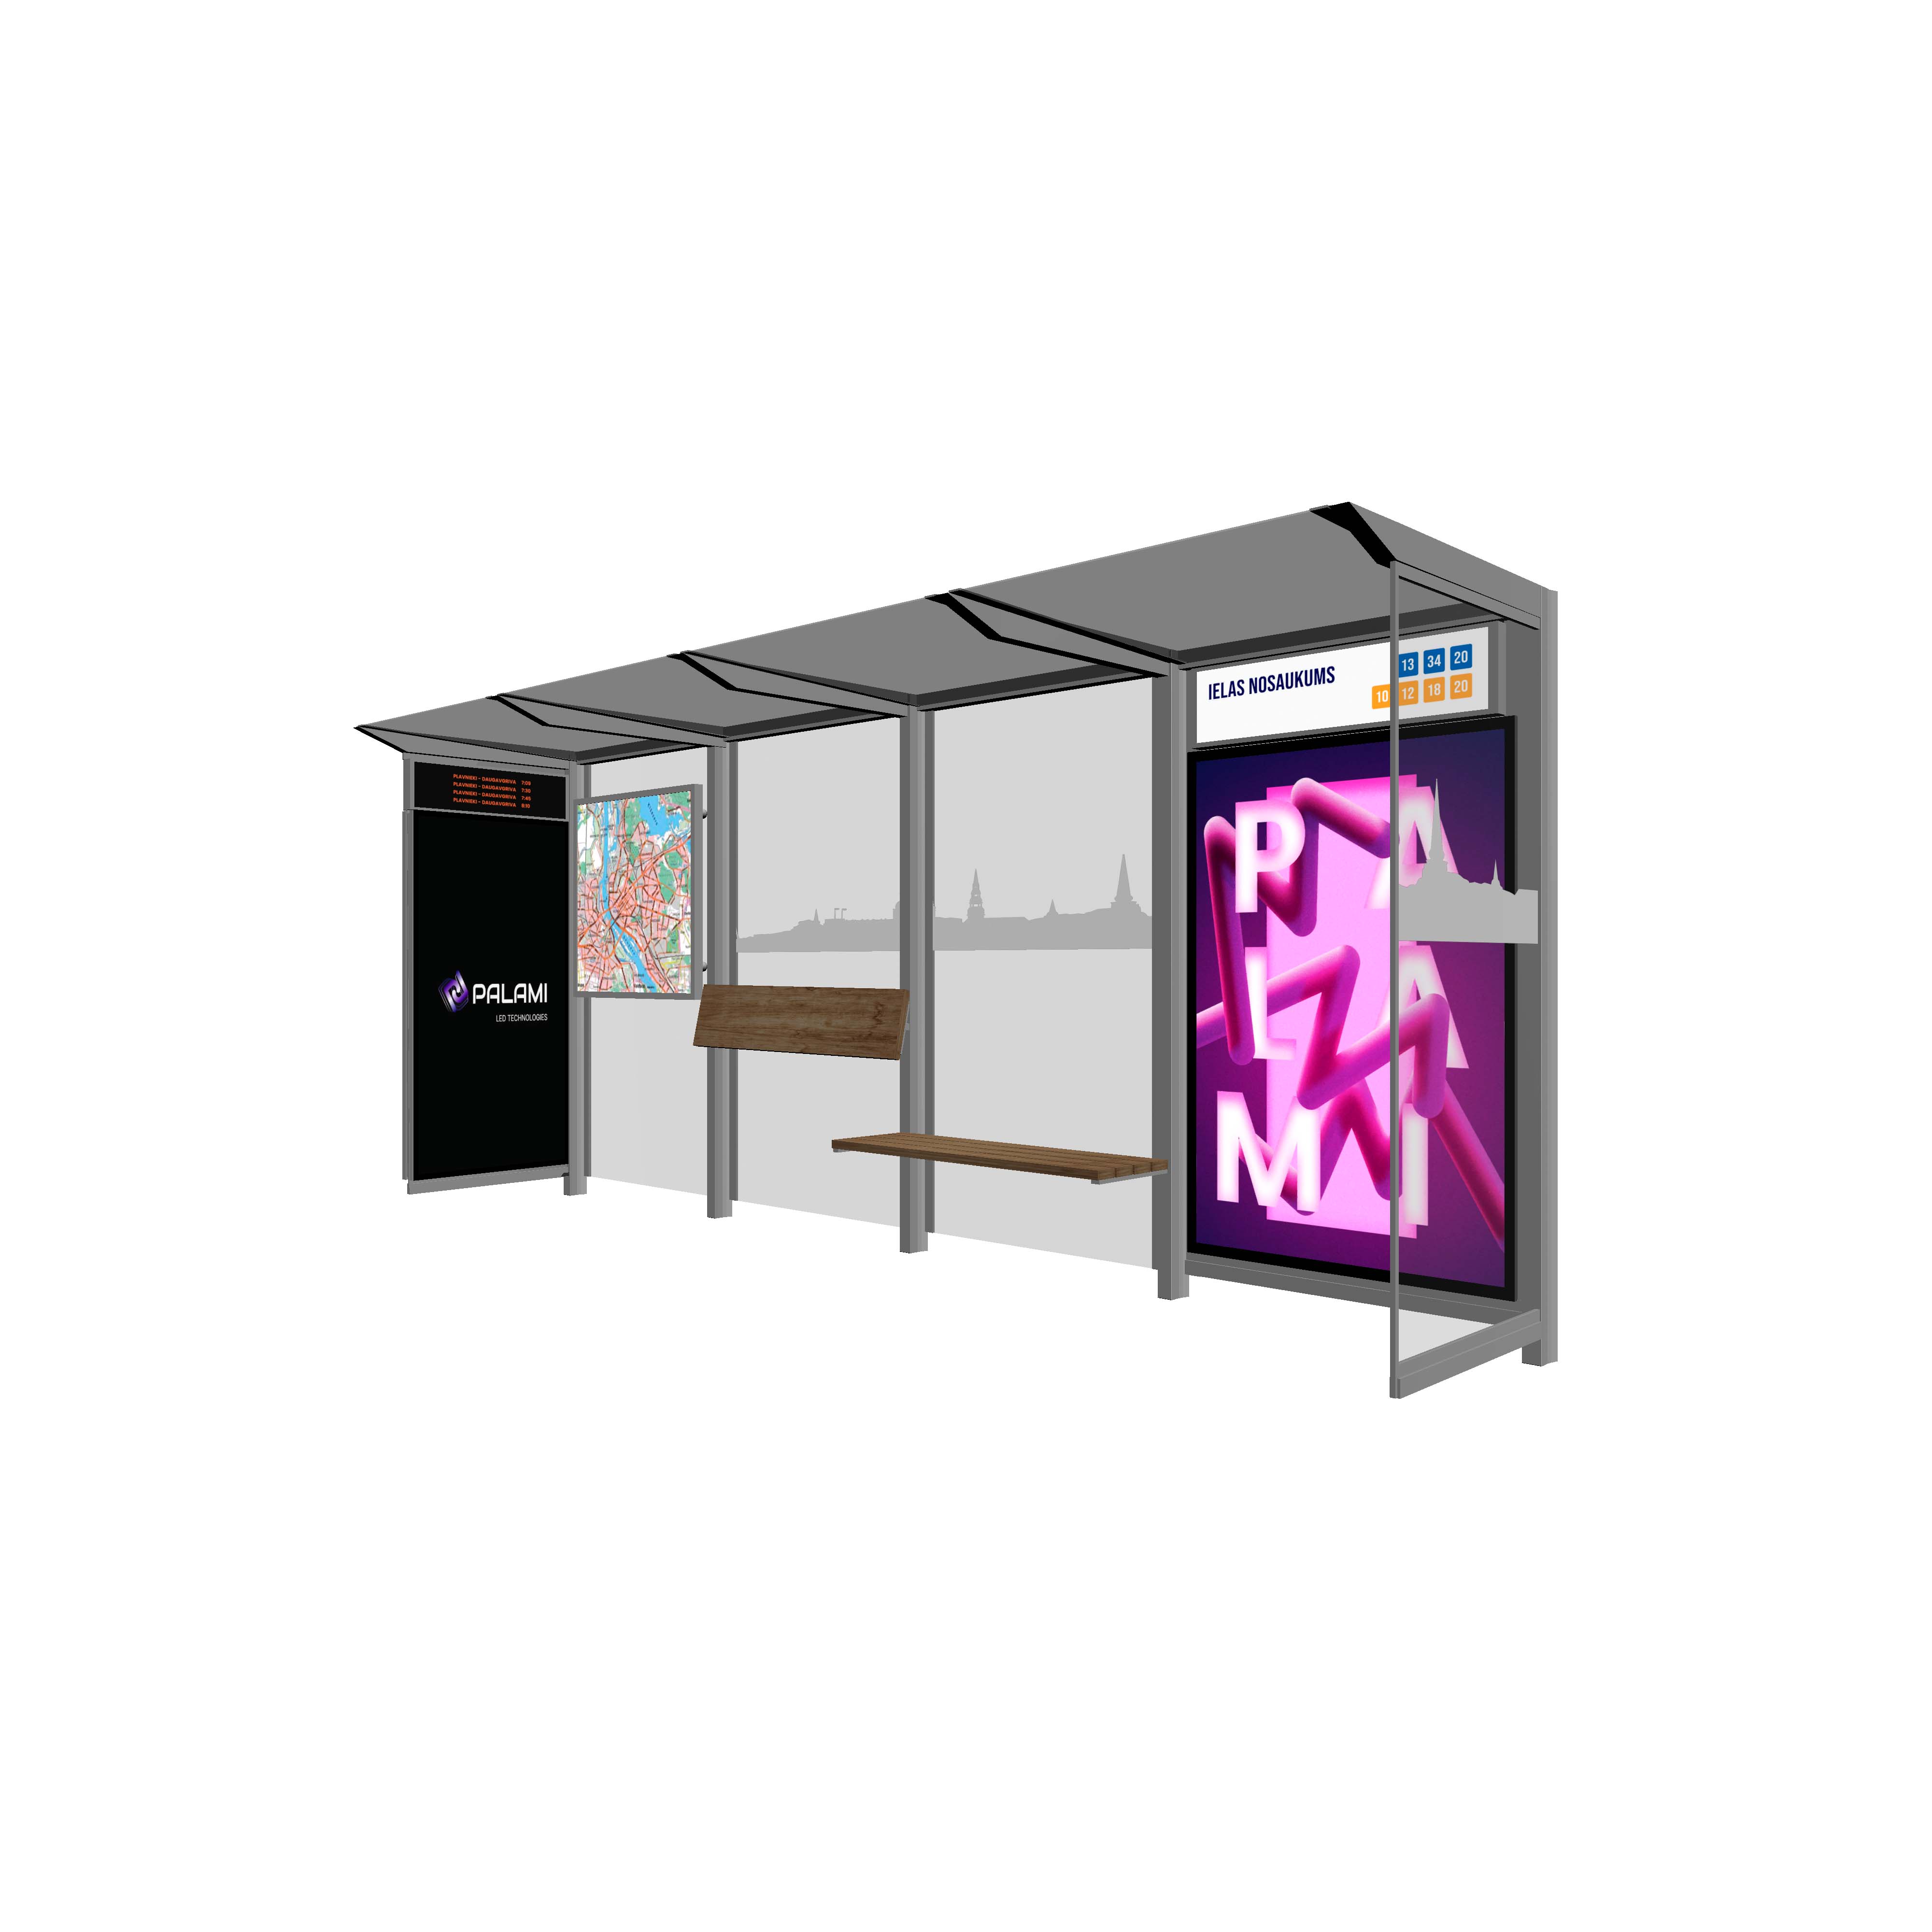 Bus Shelter RIGA XL-Size by PALAMI Group - Extremely Spacious And Maximum Visibility Outdoor Advertising Shelter